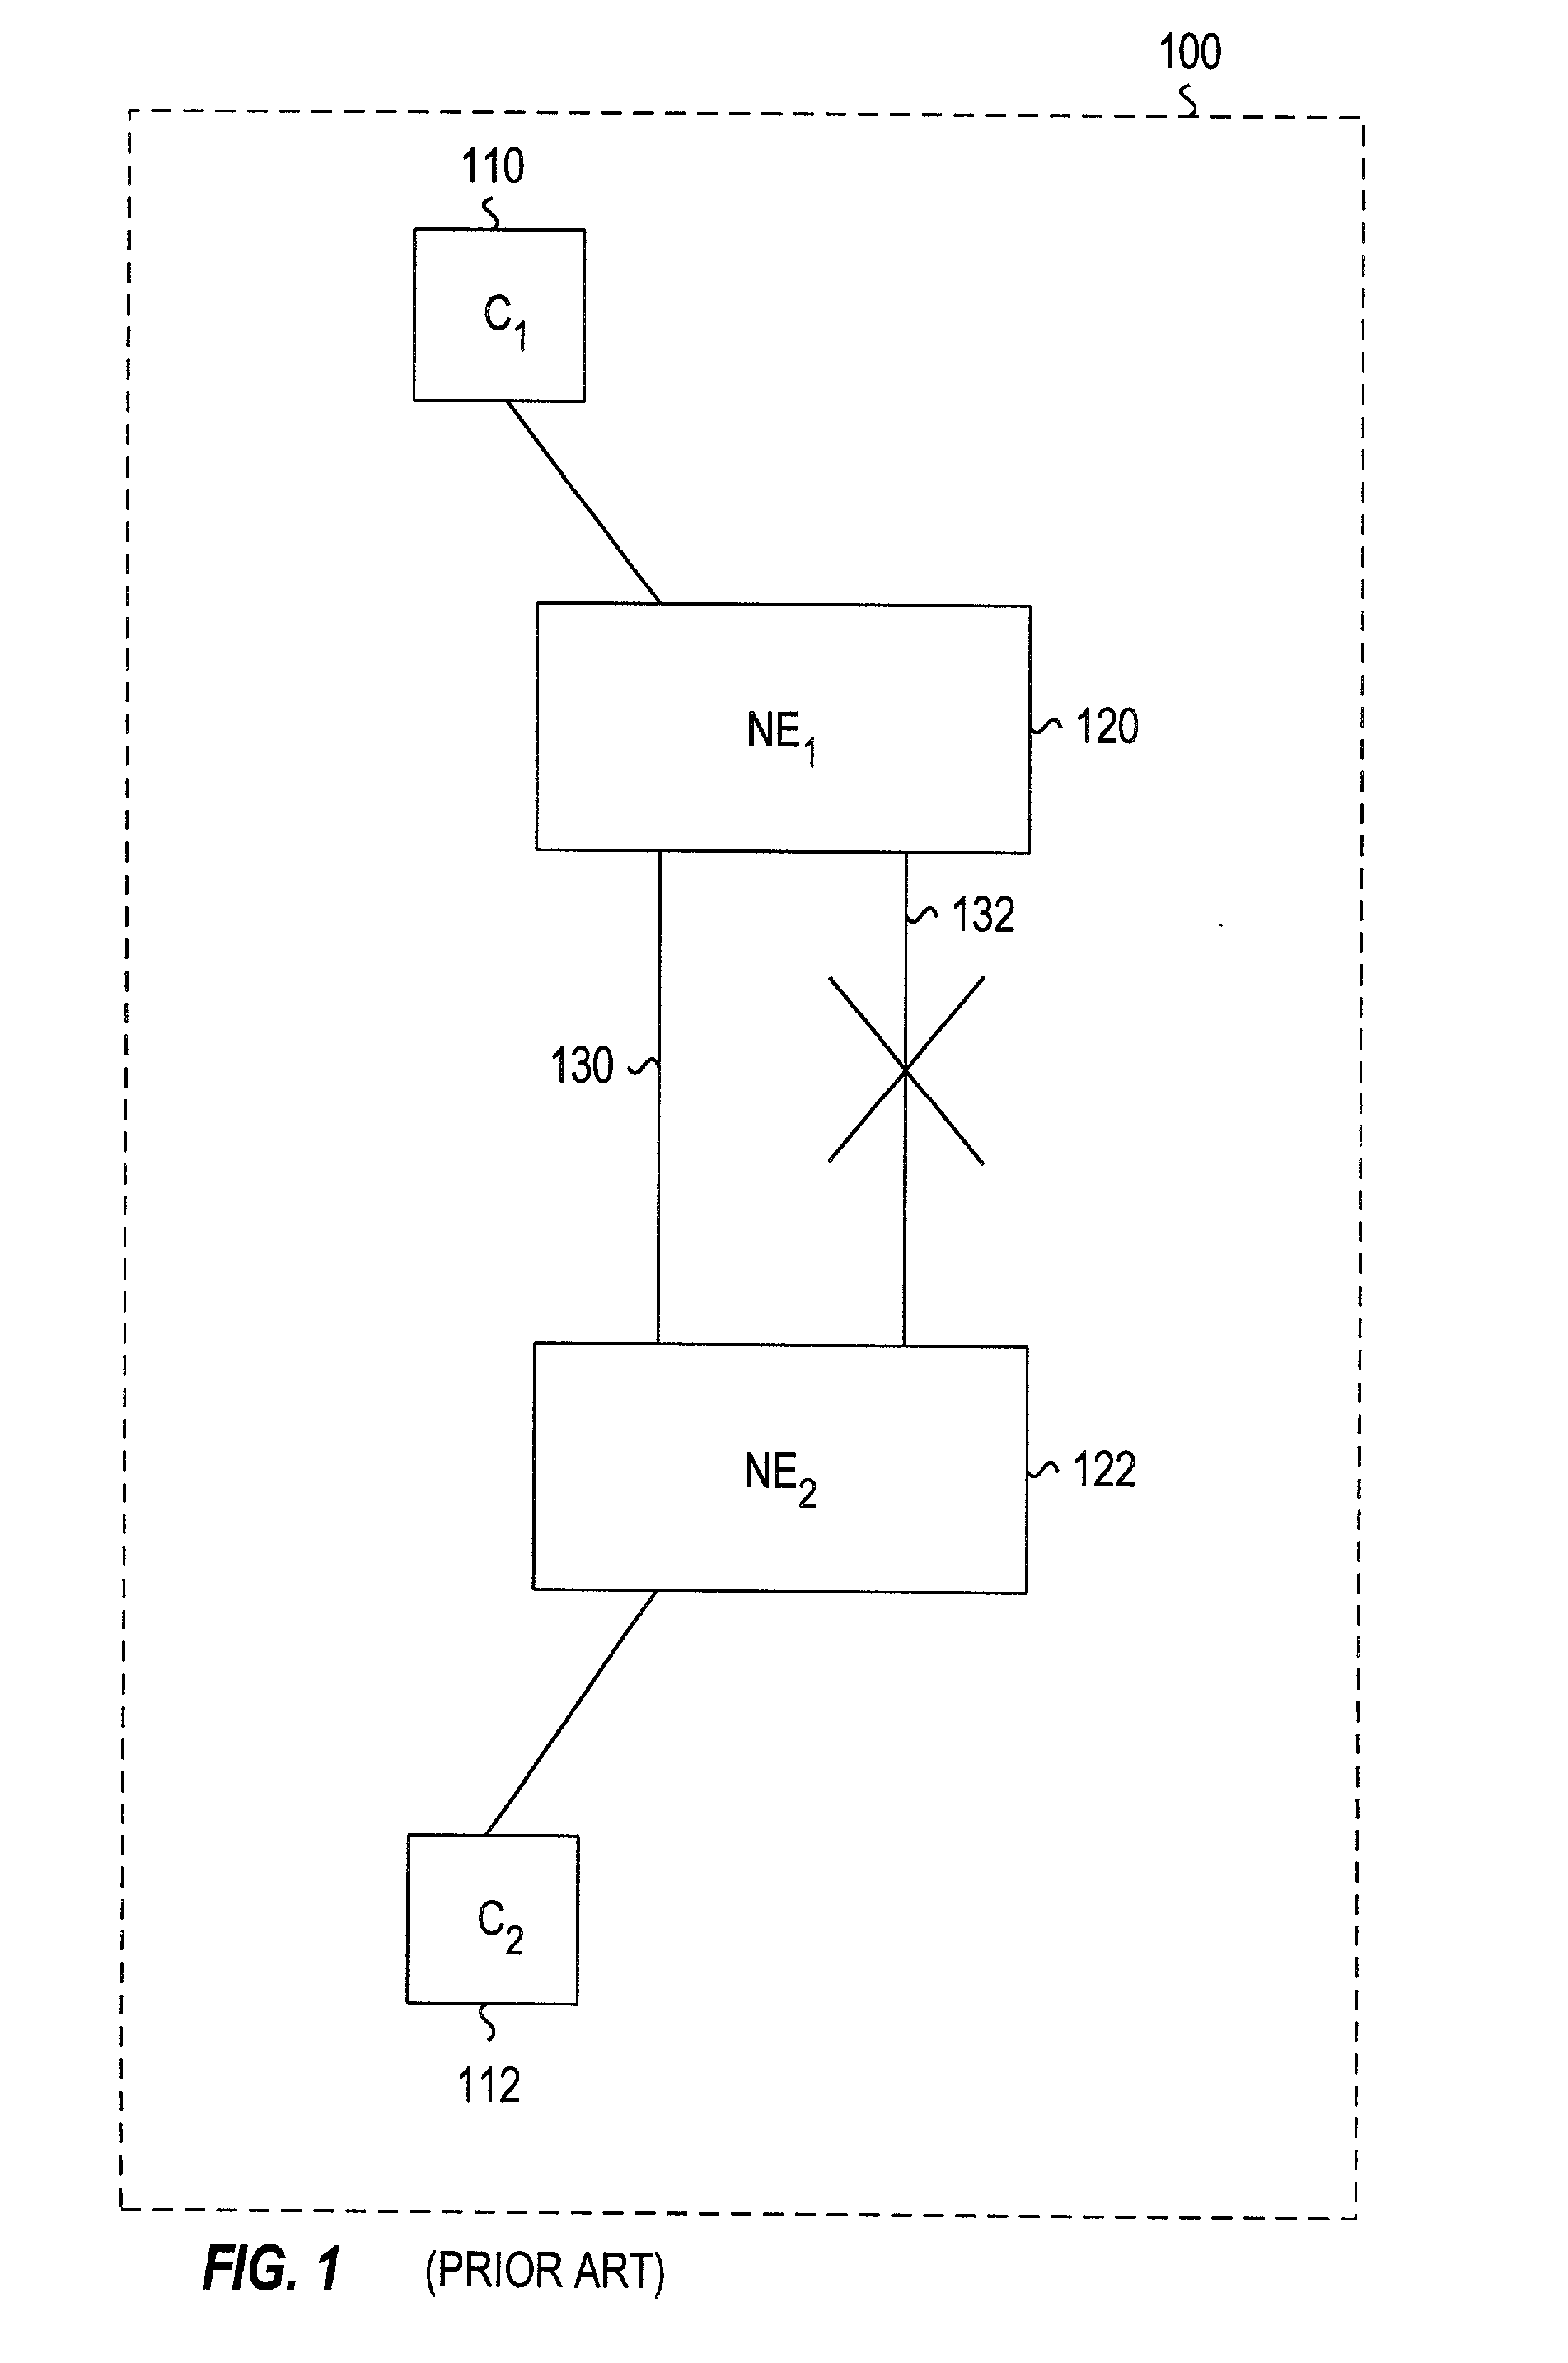 Method and apparatus for restricting the assignment of VLANs